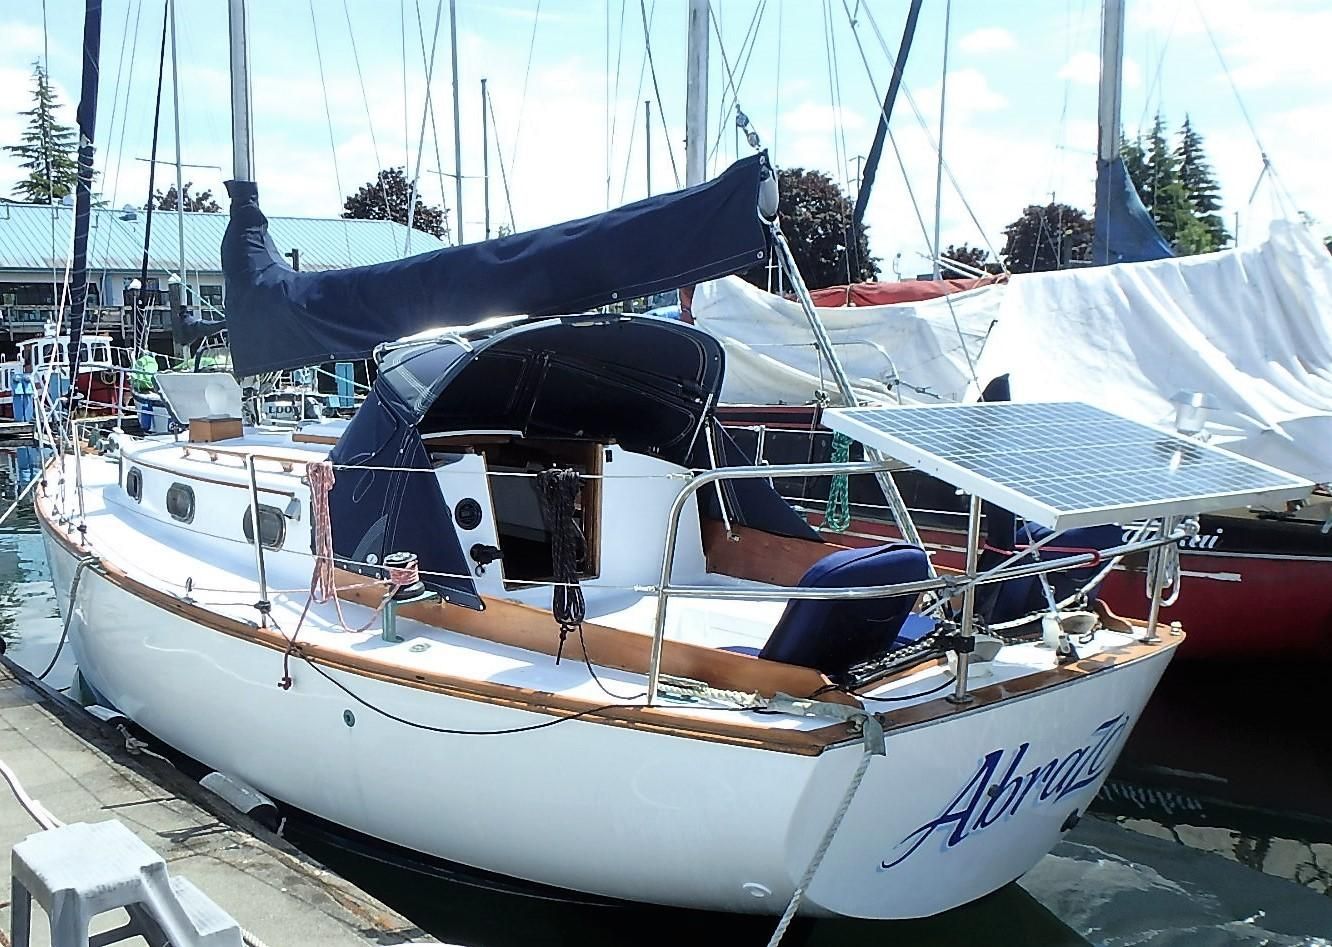 1983 Cape Dory 28 Sail Boat For Sale - www.yachtworld.com